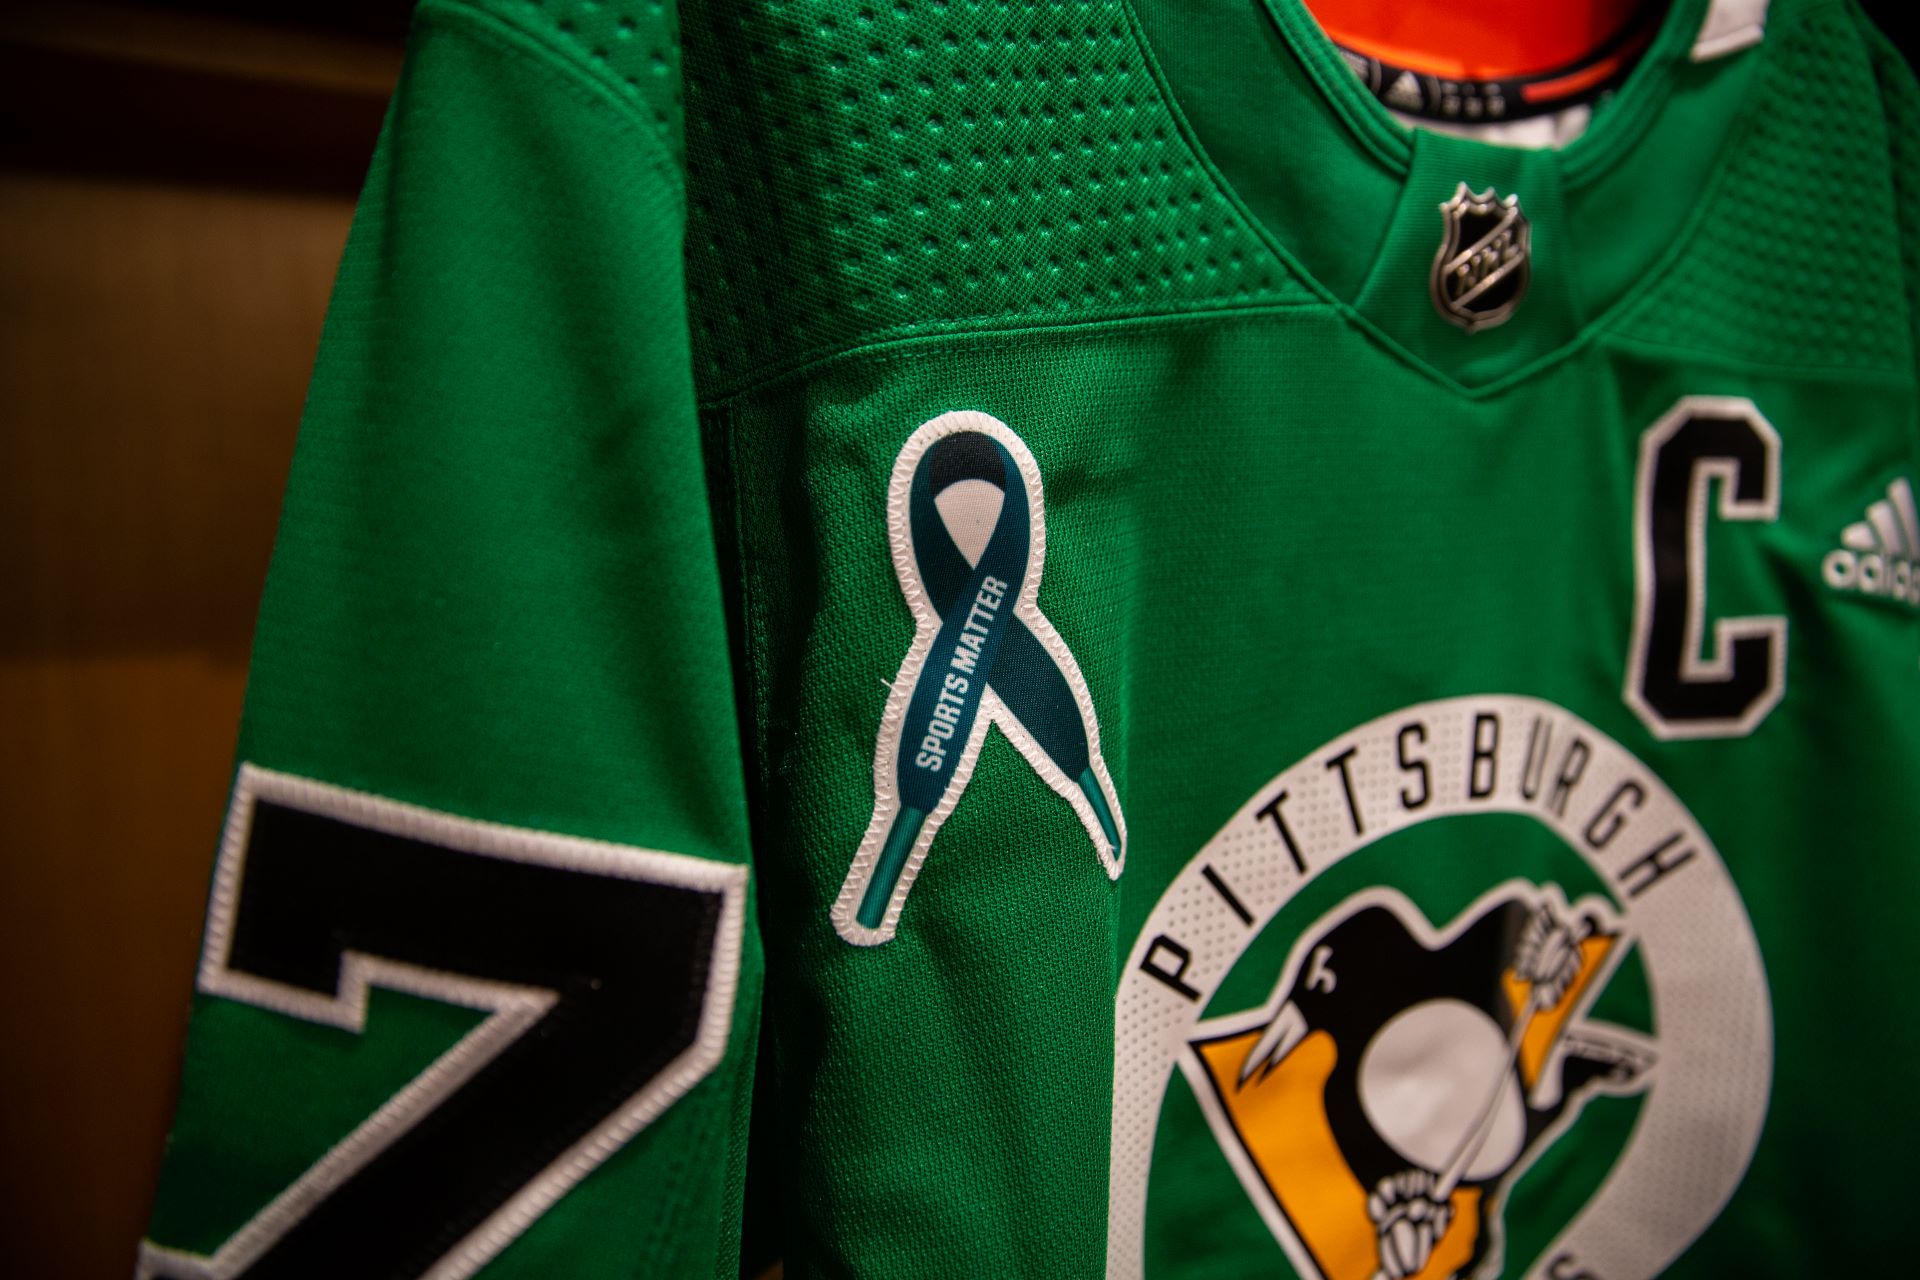 Pittsburgh Penguins Foundation - Our annual Hockey Fights Cancer game may  have come and went, but the amazing warm-up jerseys worn by Pittsburgh  Penguins players on the ice are still up for